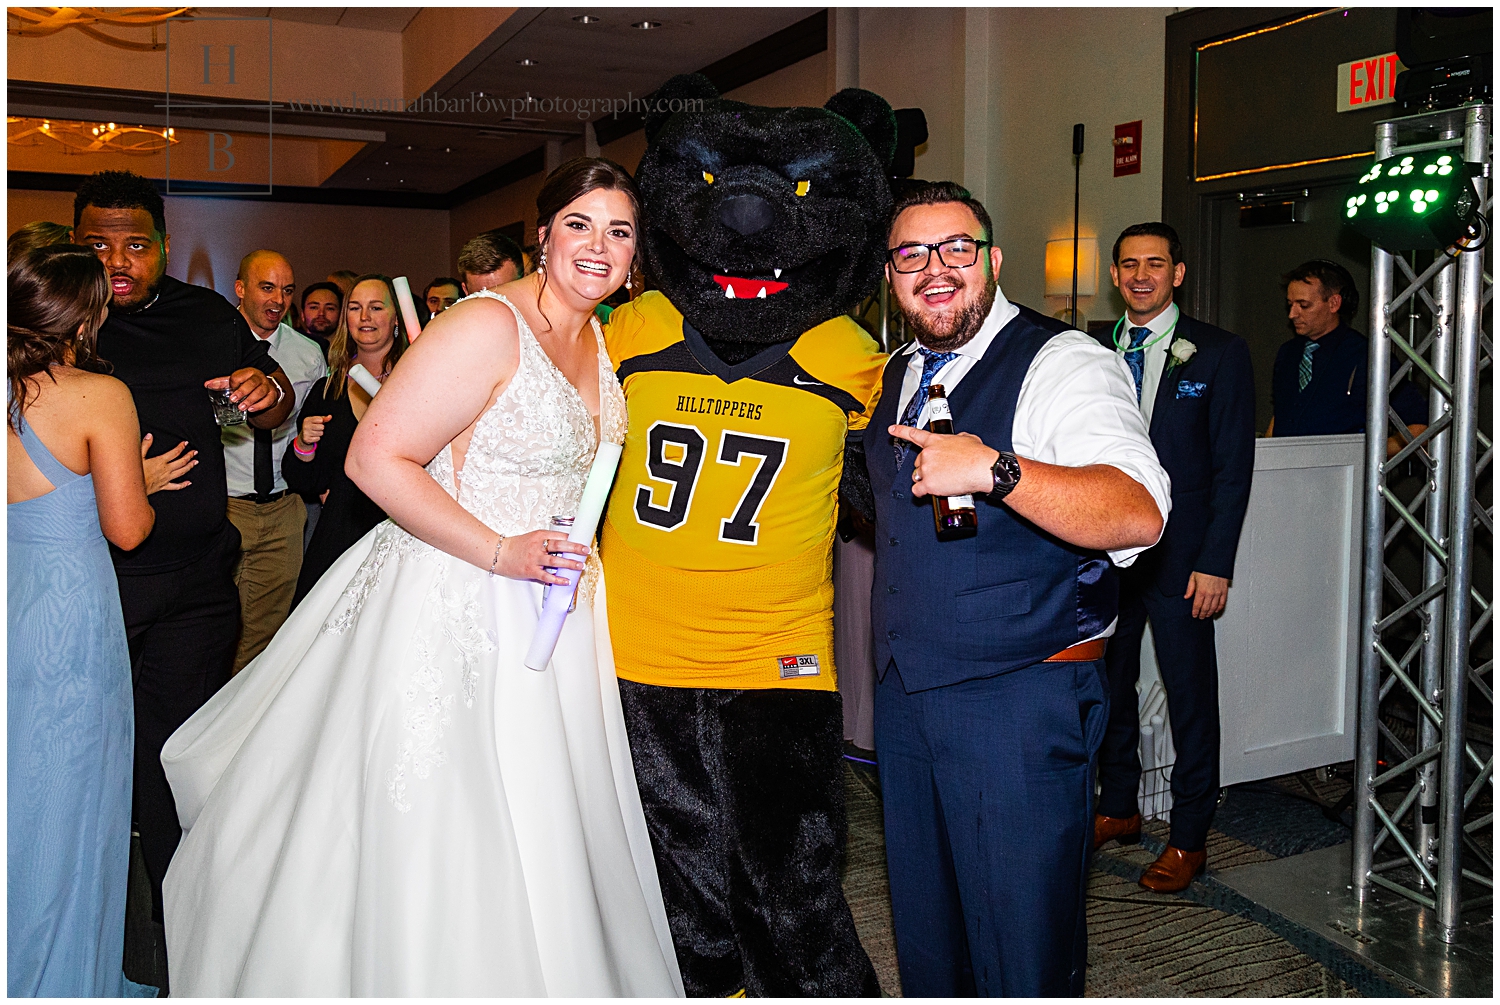 Wedding couples poses with bear mascot at wedding reception